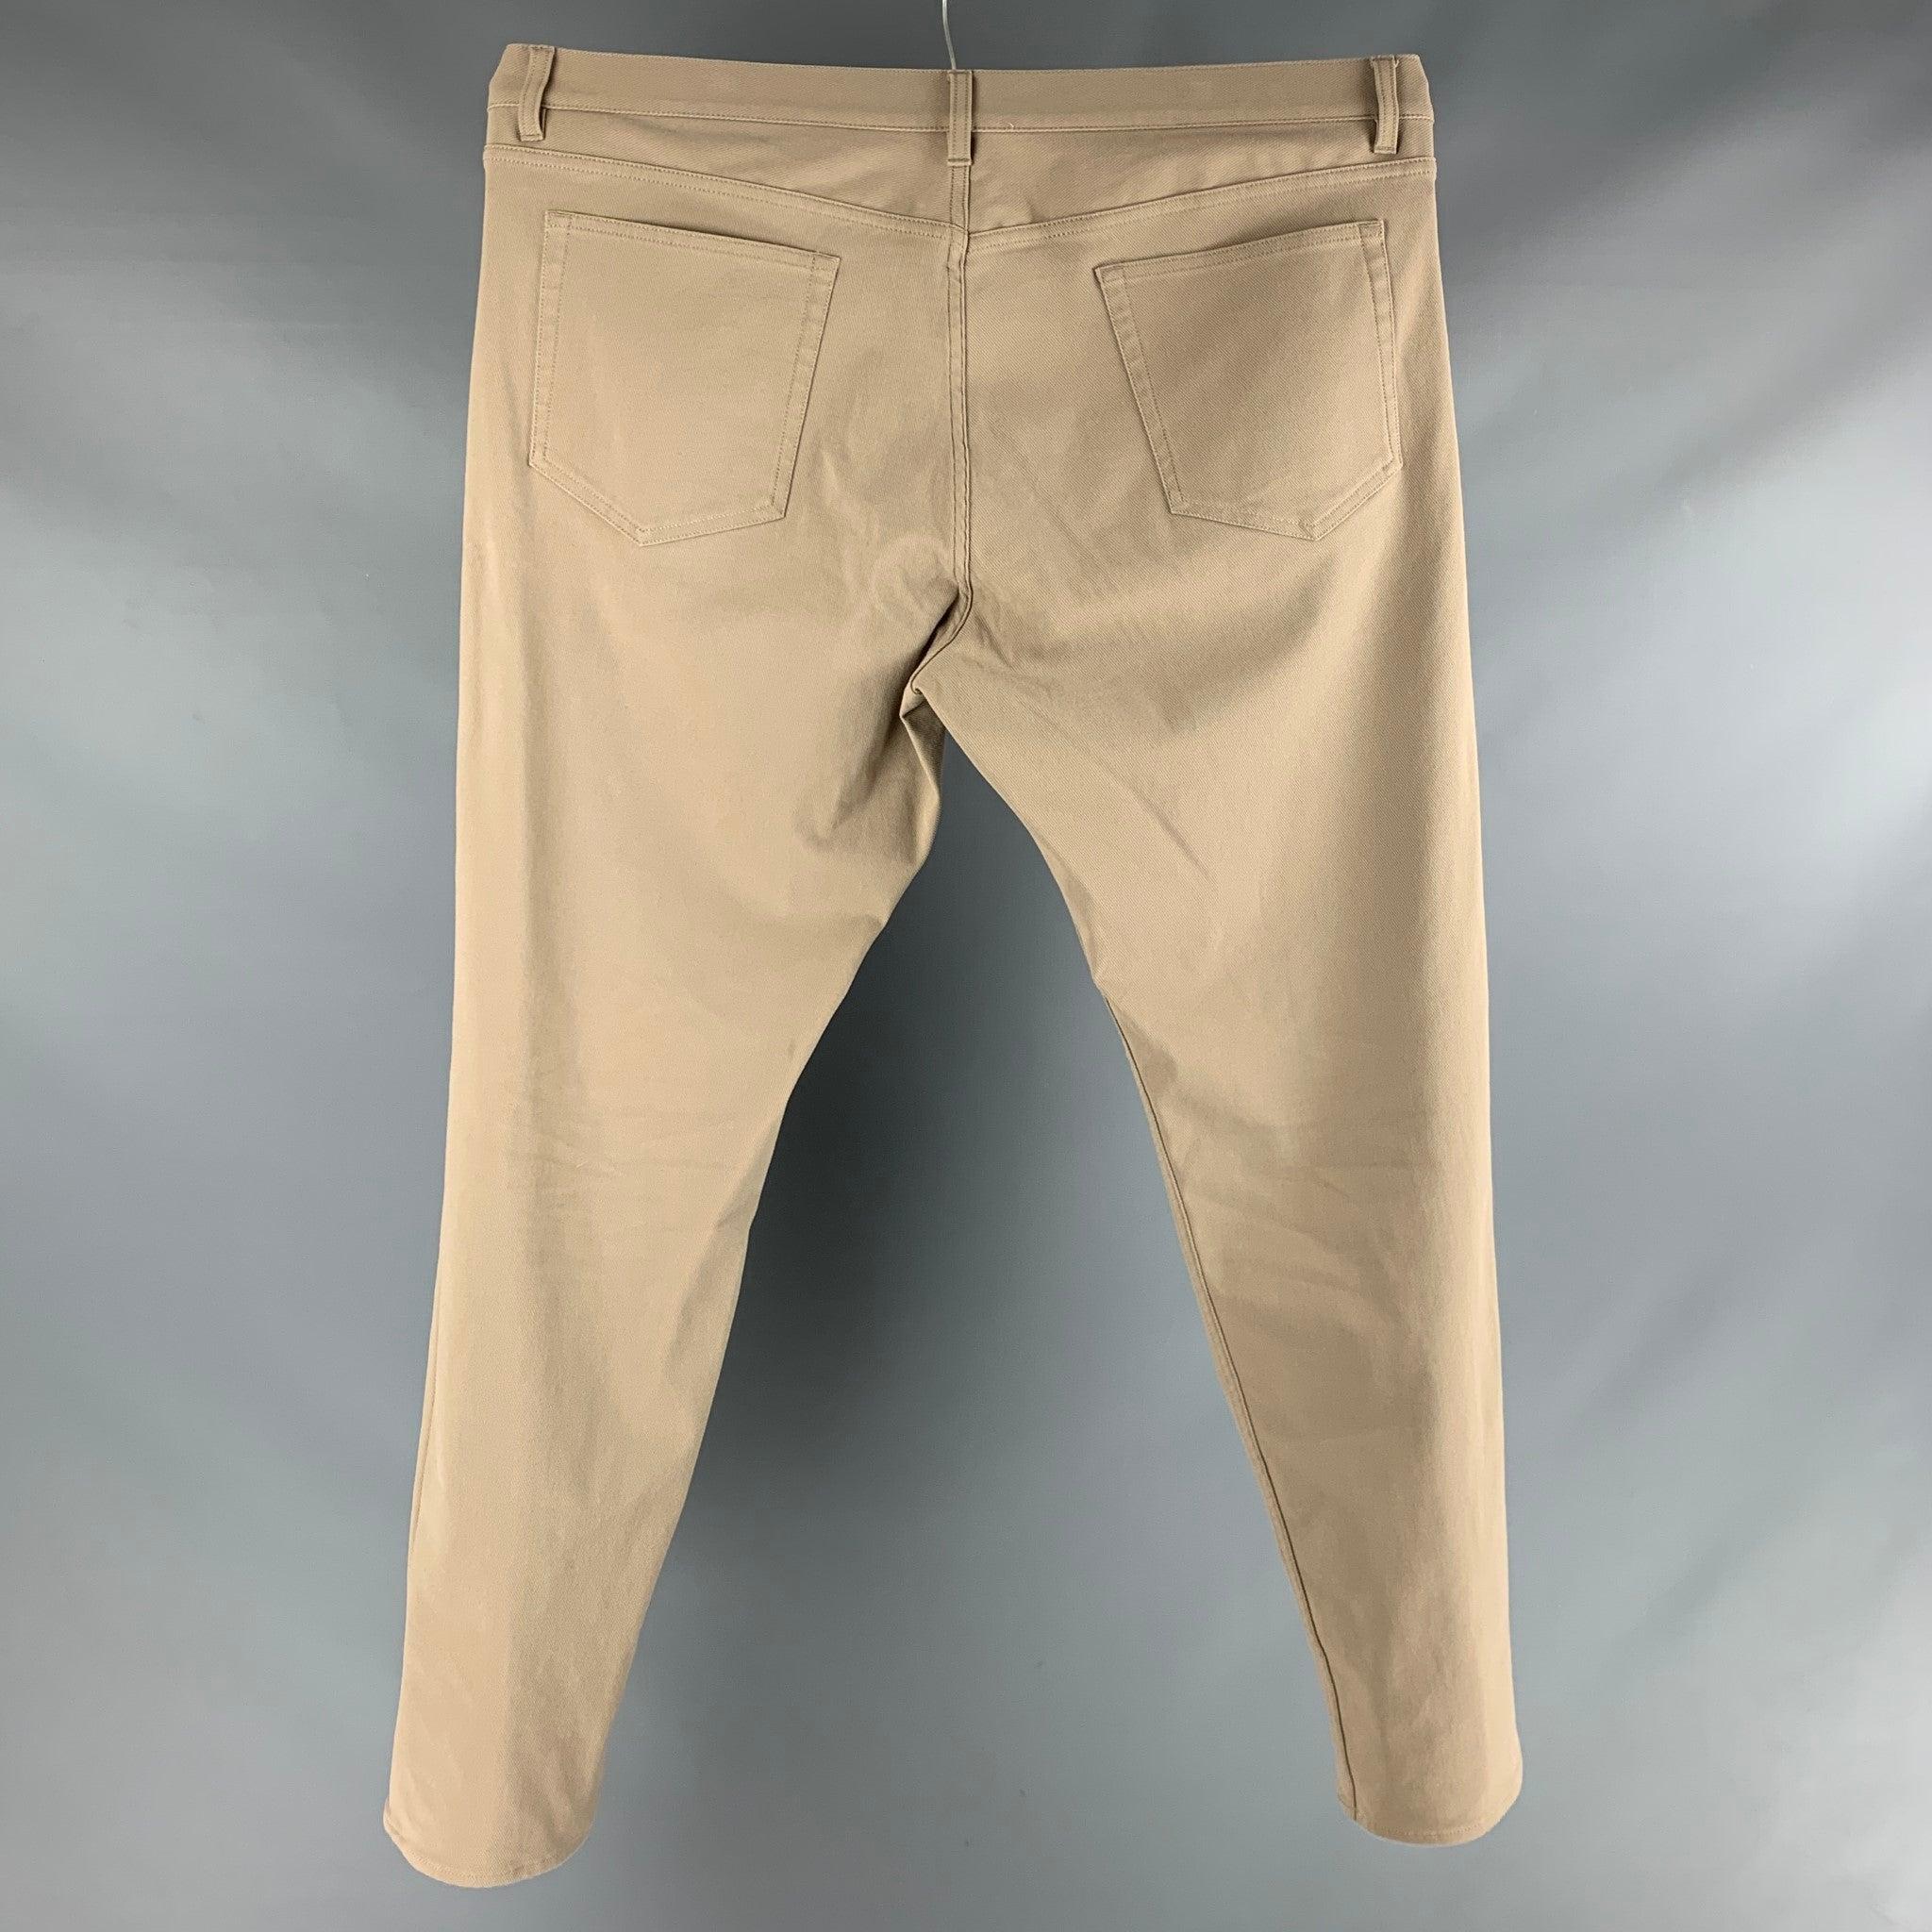 THEORY casual pants comes in a khaki twill featuring a flat front and a zip fly closure.Excellent Pre- Owned Material. 

Marked:   40 

Measurements: 
  Waist: 43 inches Rise: 10.5 inches Inseam: 31.5 inches 
 

  
  
 
Reference: 126873
Category: